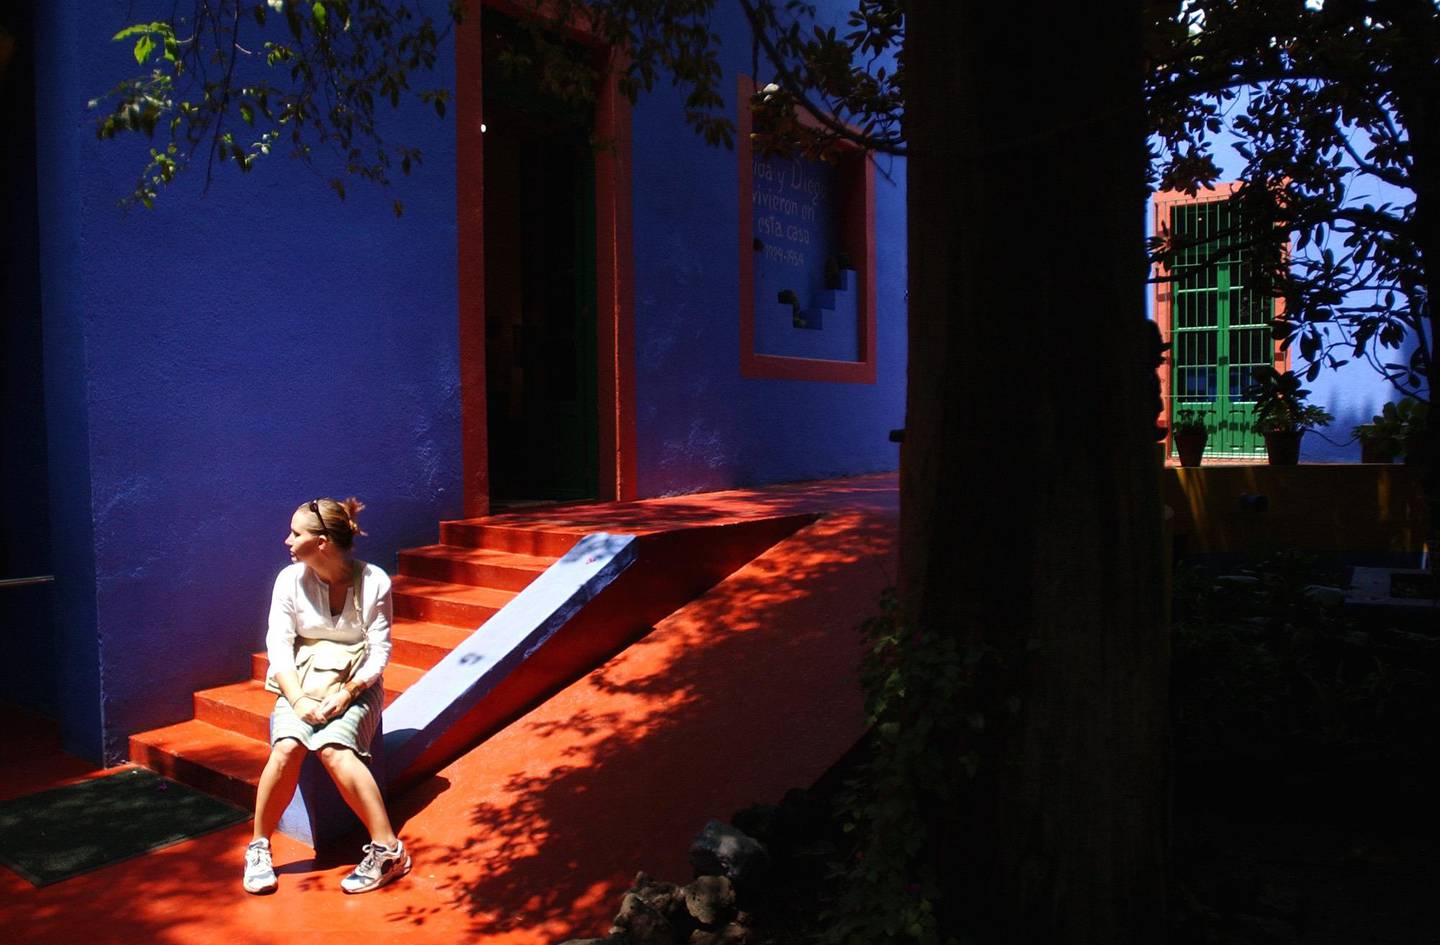 A visitor sits in the courtyard of artist Frida Kahlo's Blue House Thursday July 8, 2004, in Mexico City. Frida Kahlo was born and lived there until 1954. The house has been repainted to reflect its appearance during Kahlo's years of residence. Fifty years after  Kahlo's death her very private, raw and vulnerable work is only getting more popular.(AP Photo/Jose Luis Magana)